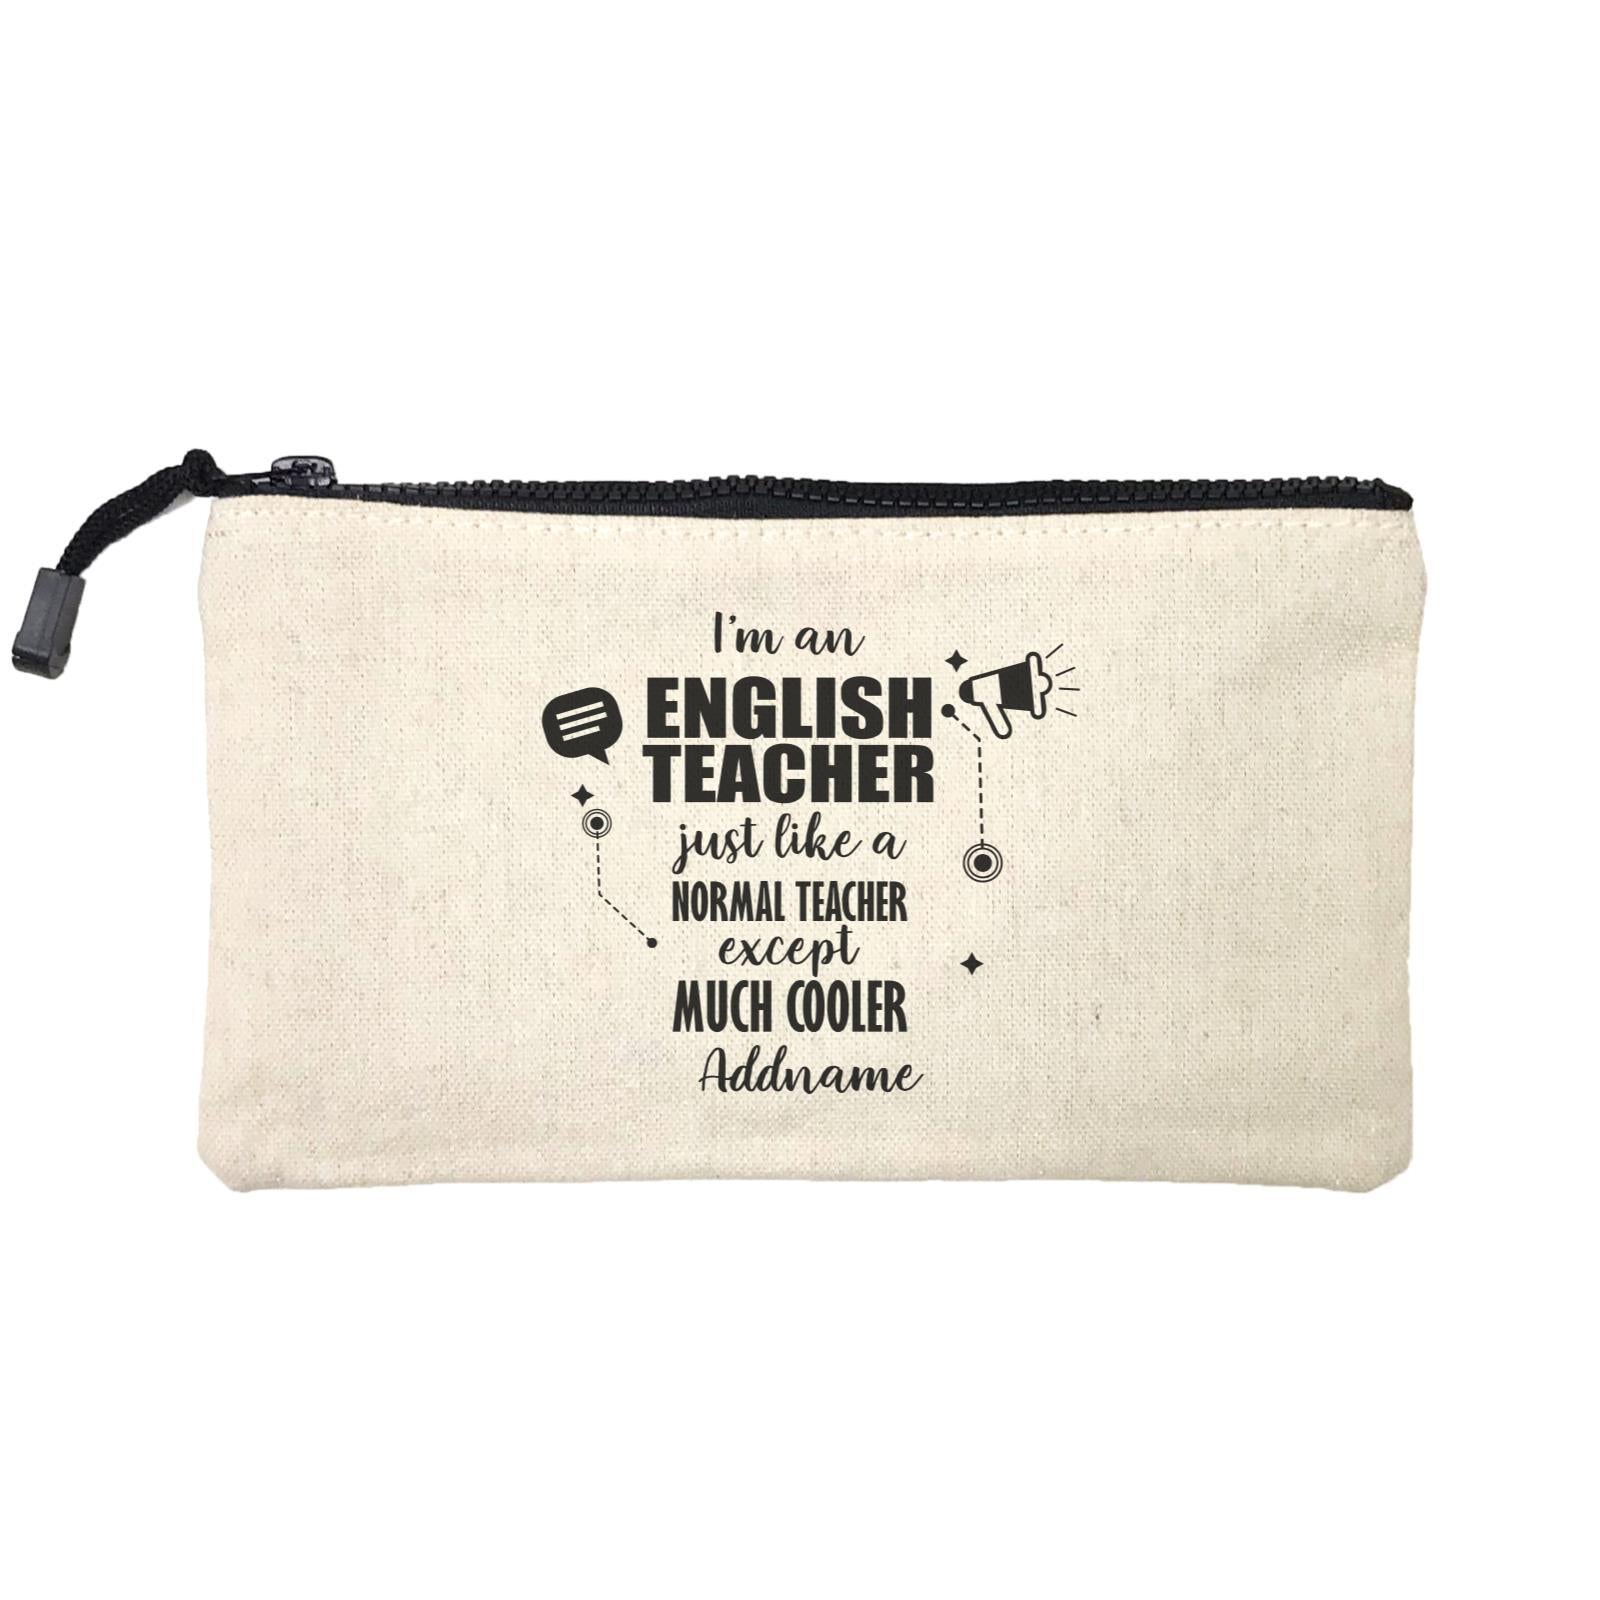 Subject Teachers 3 I'm A English Teacher Addname Mini Accessories Stationery Pouch